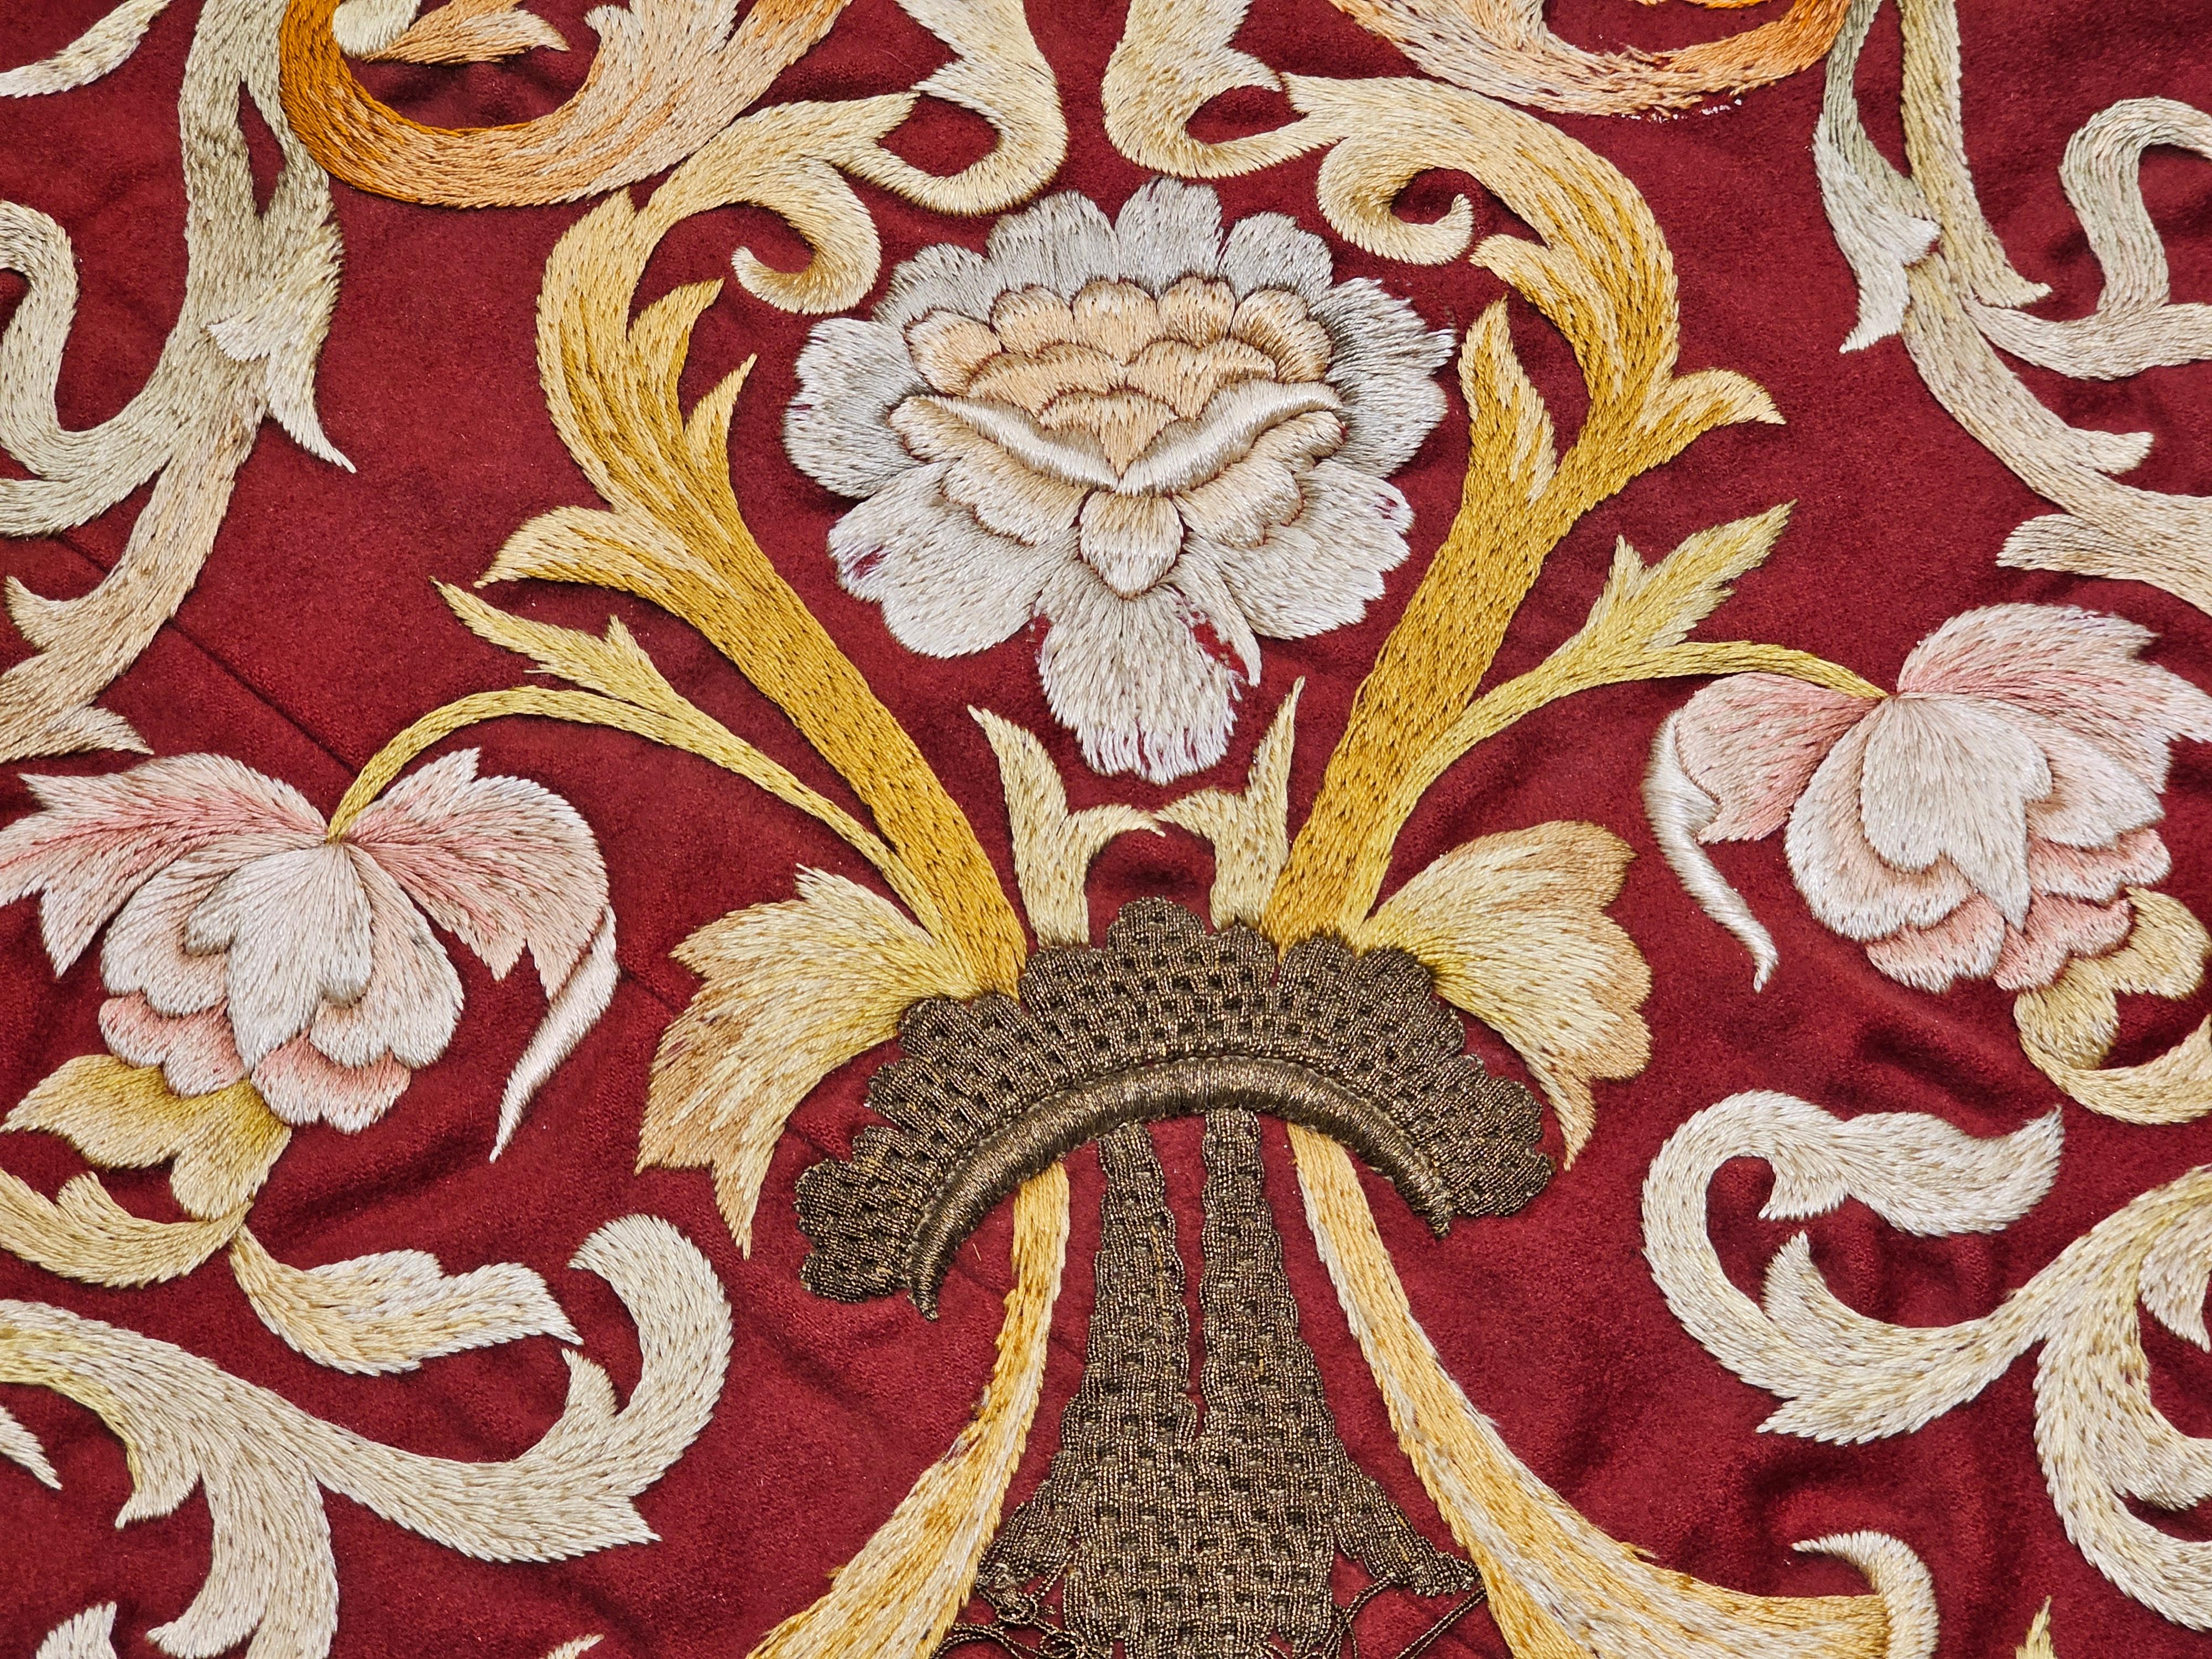 19th Century Ottoman Hand Embroidered Silk and Gilt Threads Tapestry Textile For Sale 1